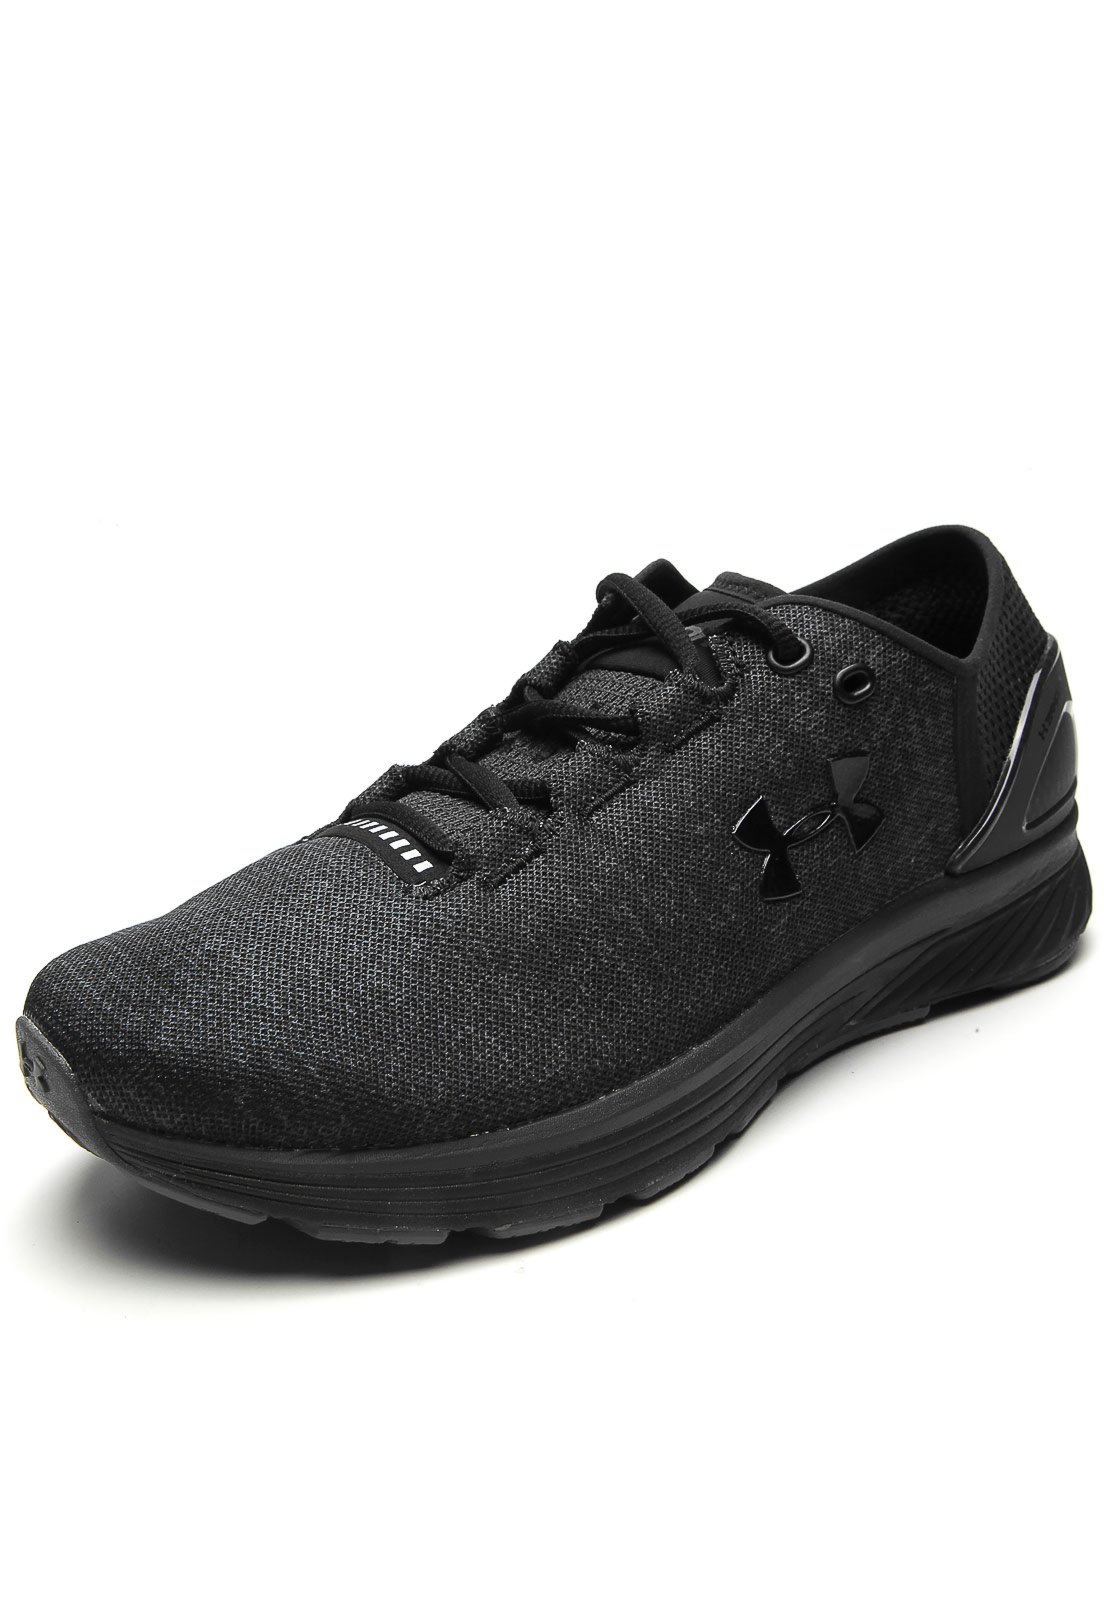 Tênis Under Armour Charged Bandit Masculino - Tênis Under Armour